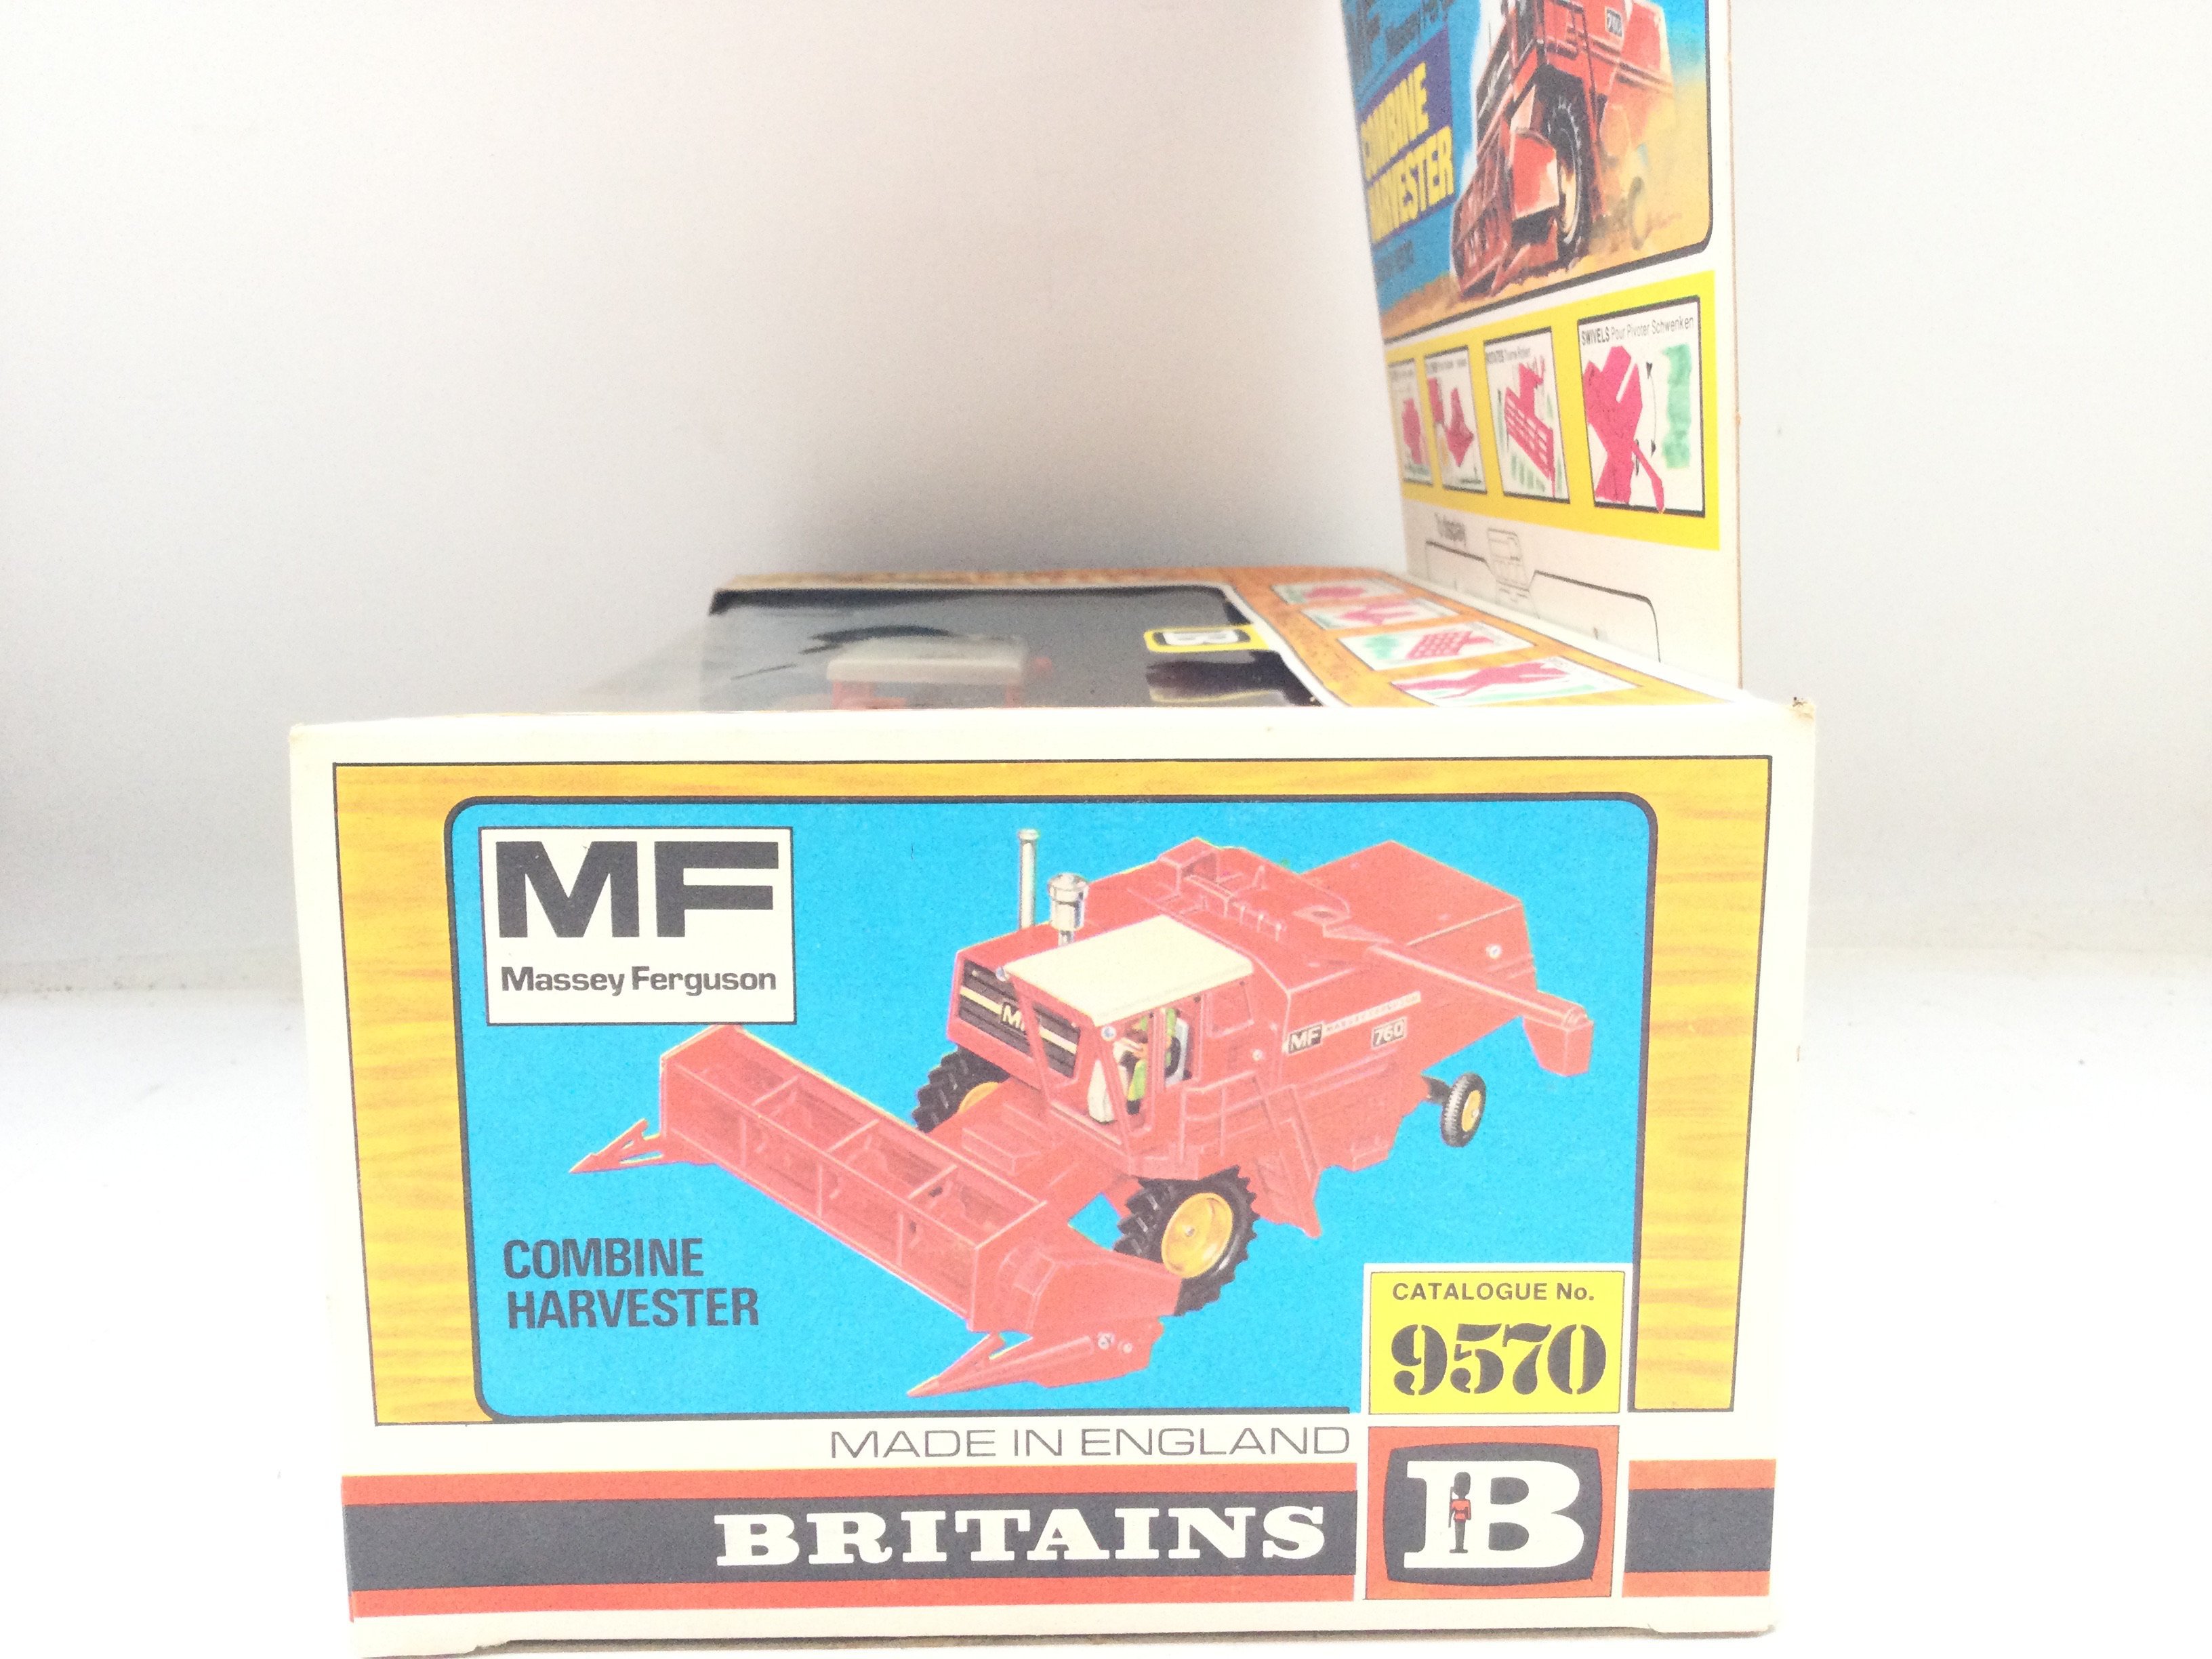 A Boxed Britains Massey Ferguson Combine Harvester - Image 2 of 3